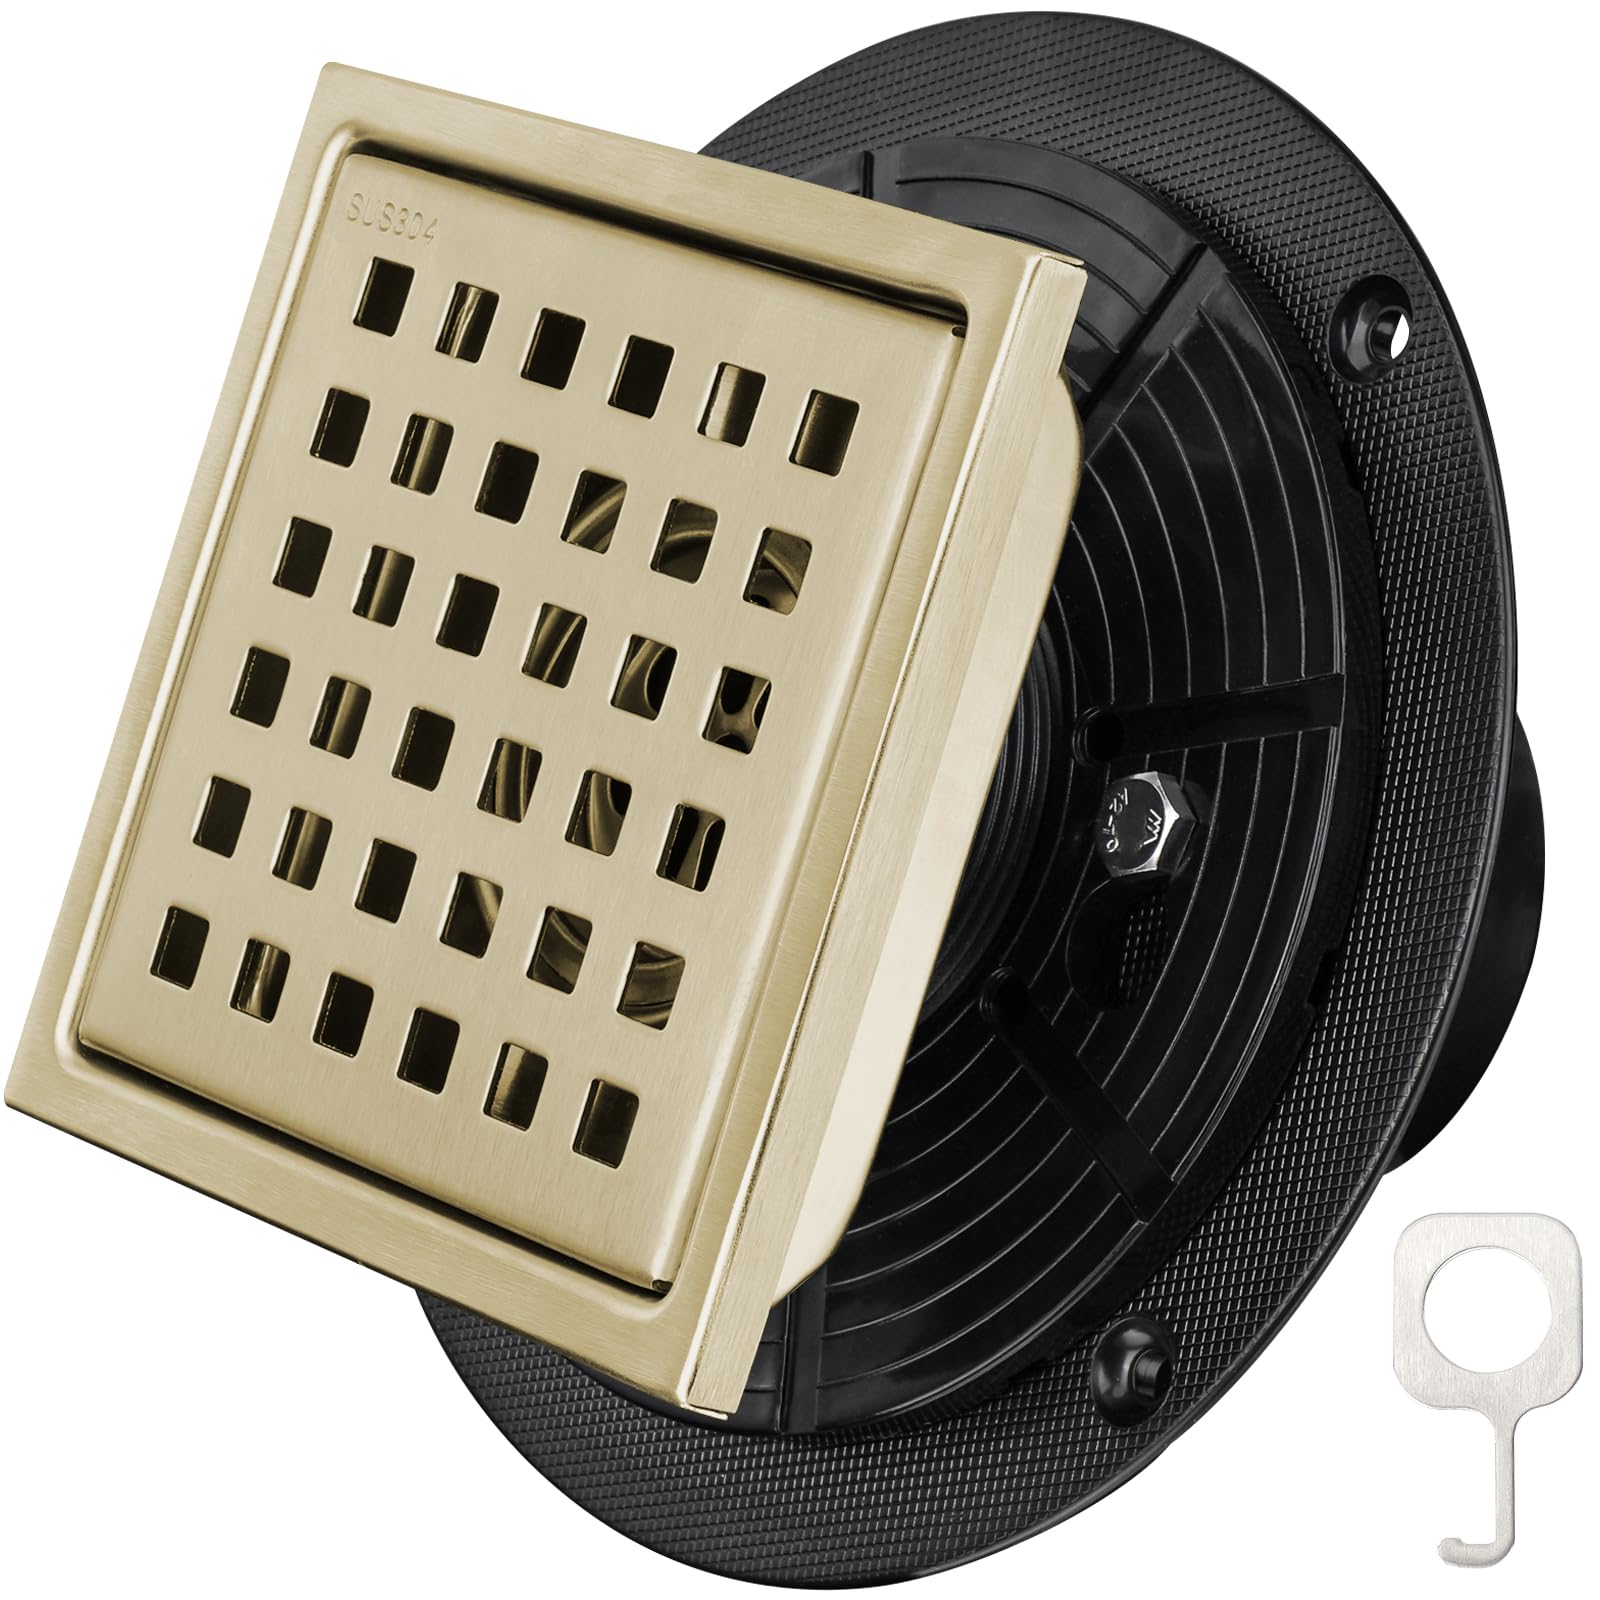 TICONN 4'' Square Floor Shower Drain, Lattice Square Perforated Pattern Easy Cleaning Removable Grate, Rustproof SUS 304 Stainless Steel (Brushed Gold, 4'')